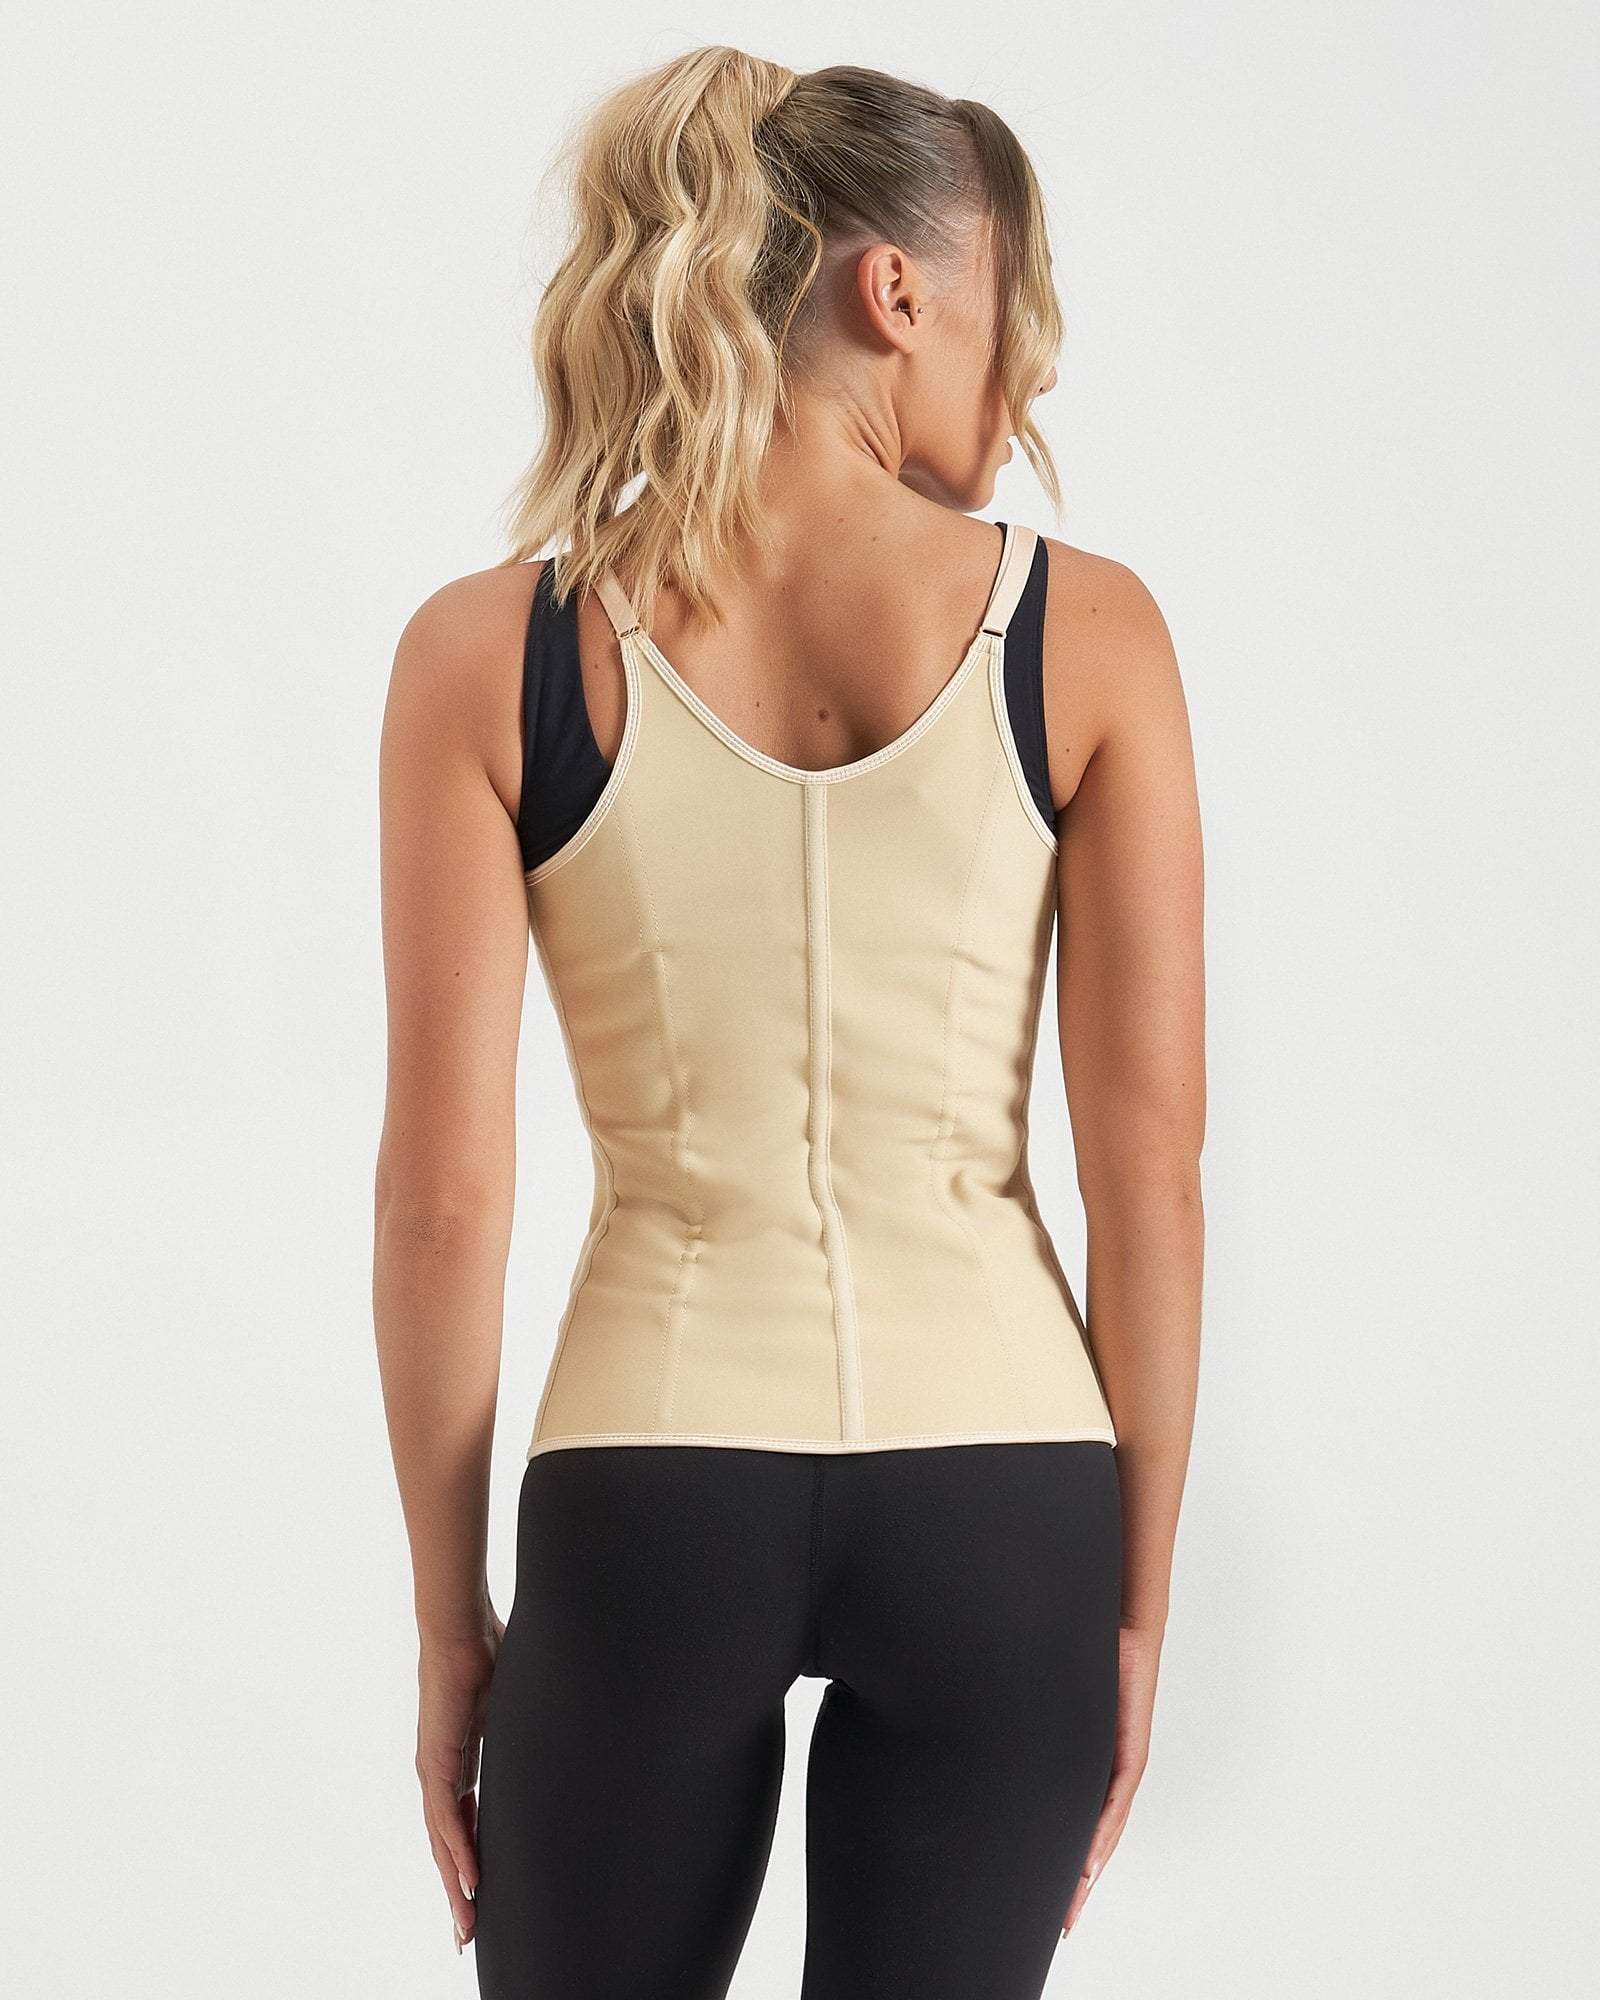 Core Trainer Waist trainer Core Trainer Deluxe Vest With Adjustable Straps Nude